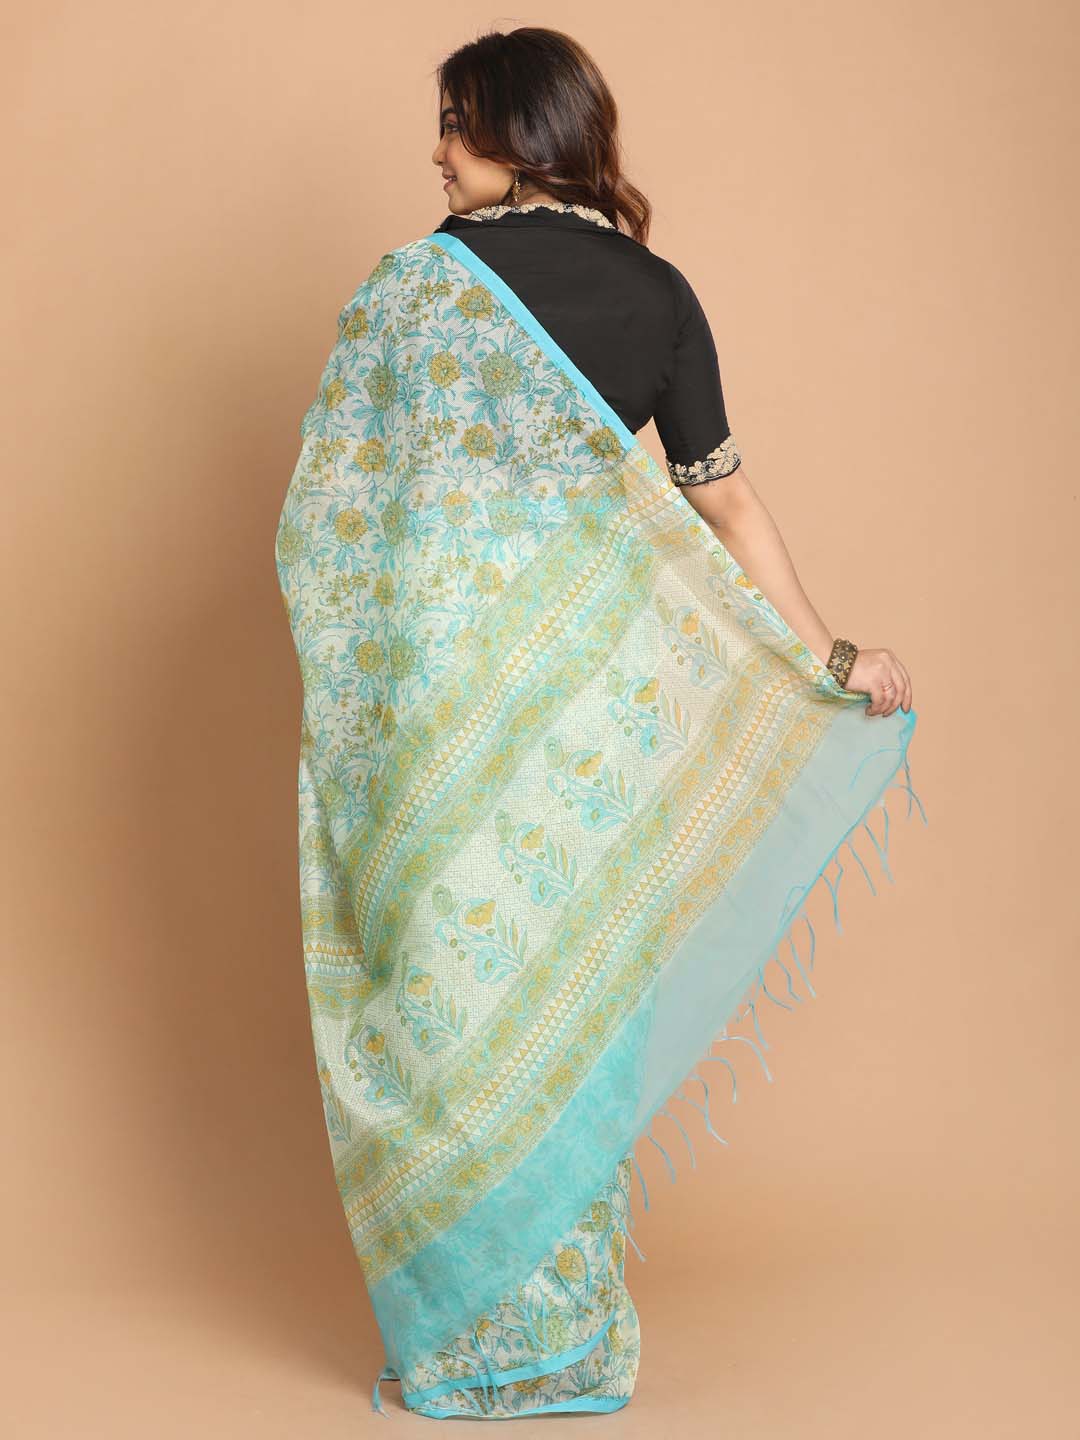 Indethnic Printed Cotton Blend Saree in Blue - View 3